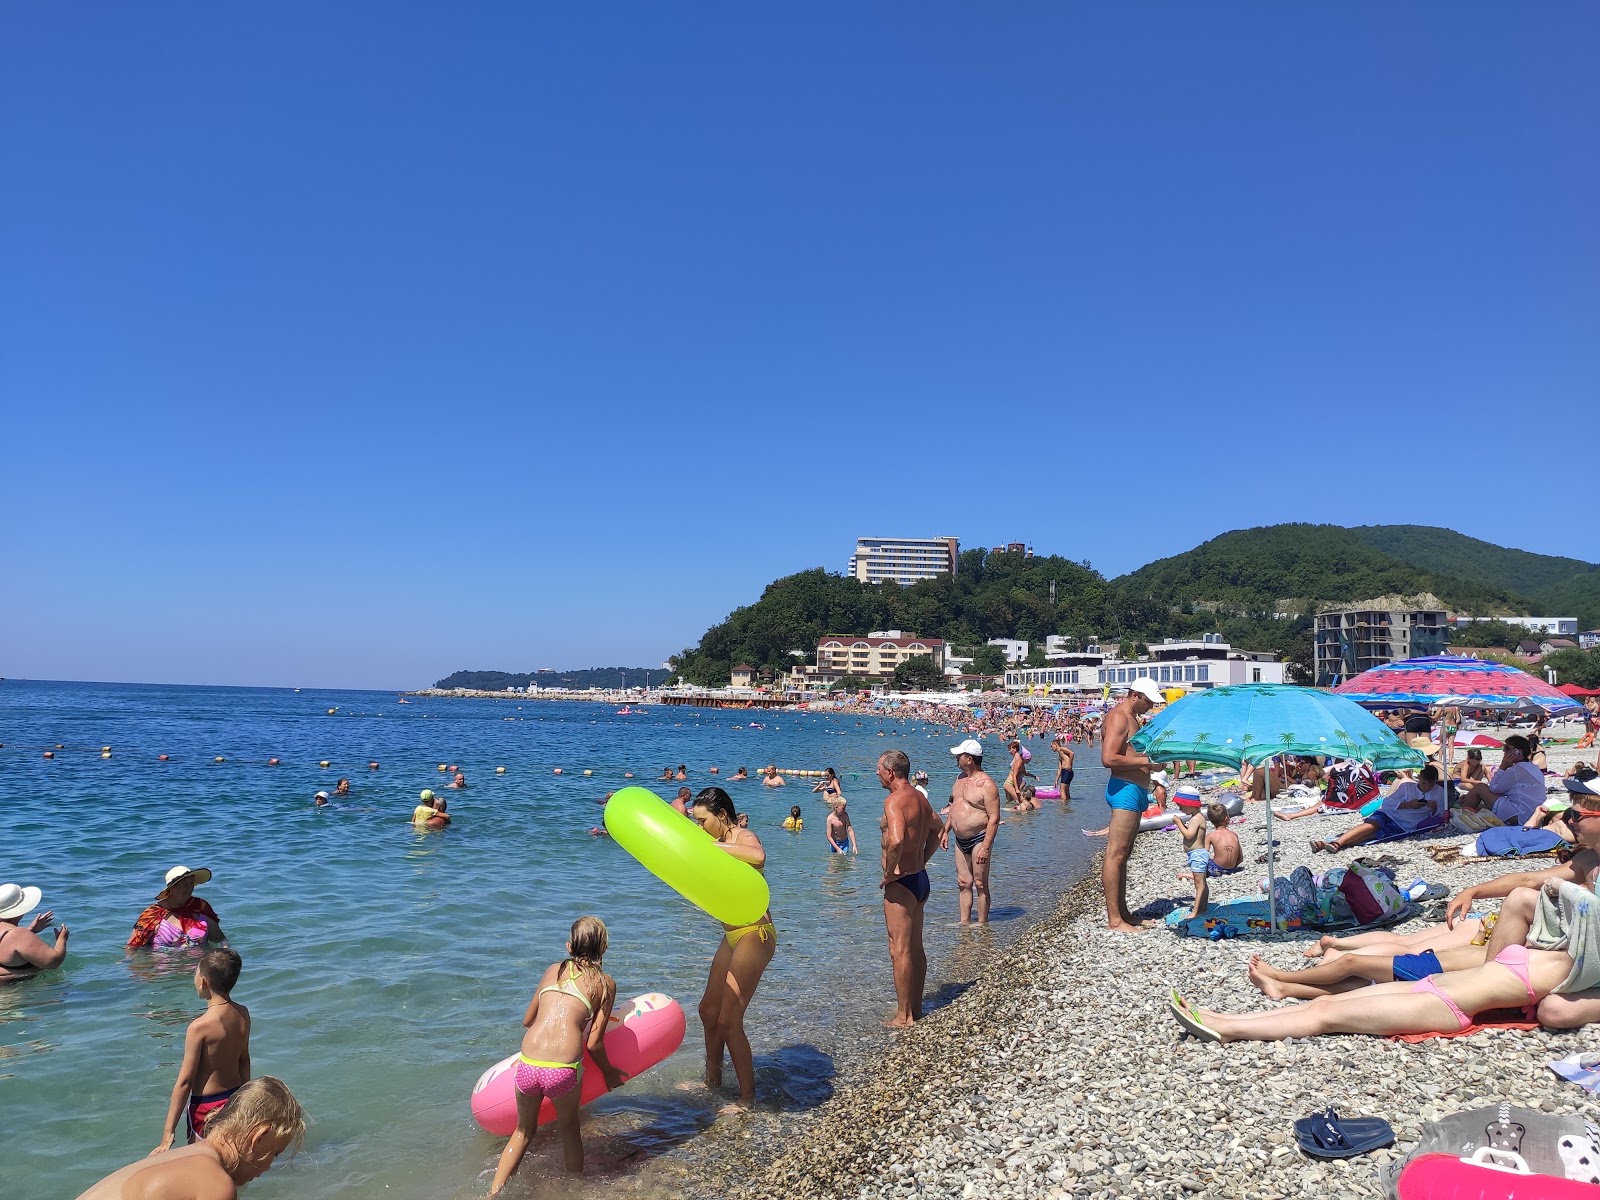 Photo of Nebug beach - popular place among relax connoisseurs